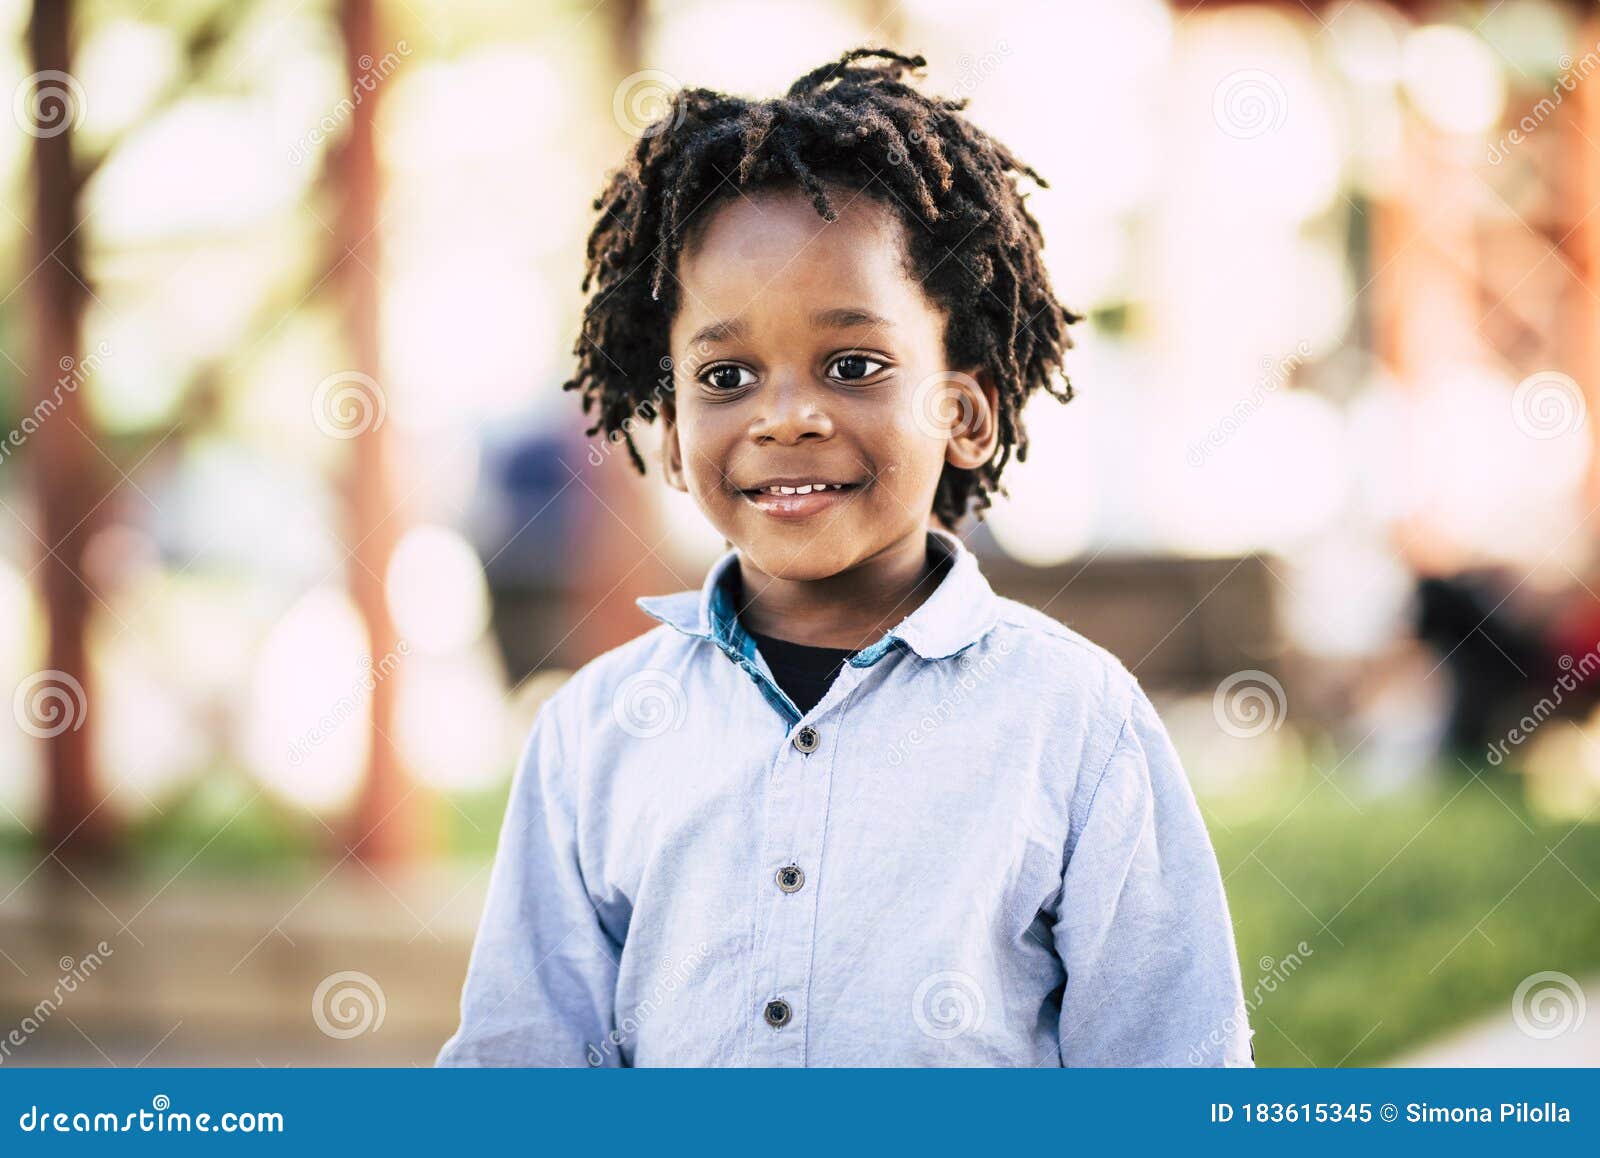 beutiful black african people children portrait with park outdoor defocused background - color and skin race diversity child